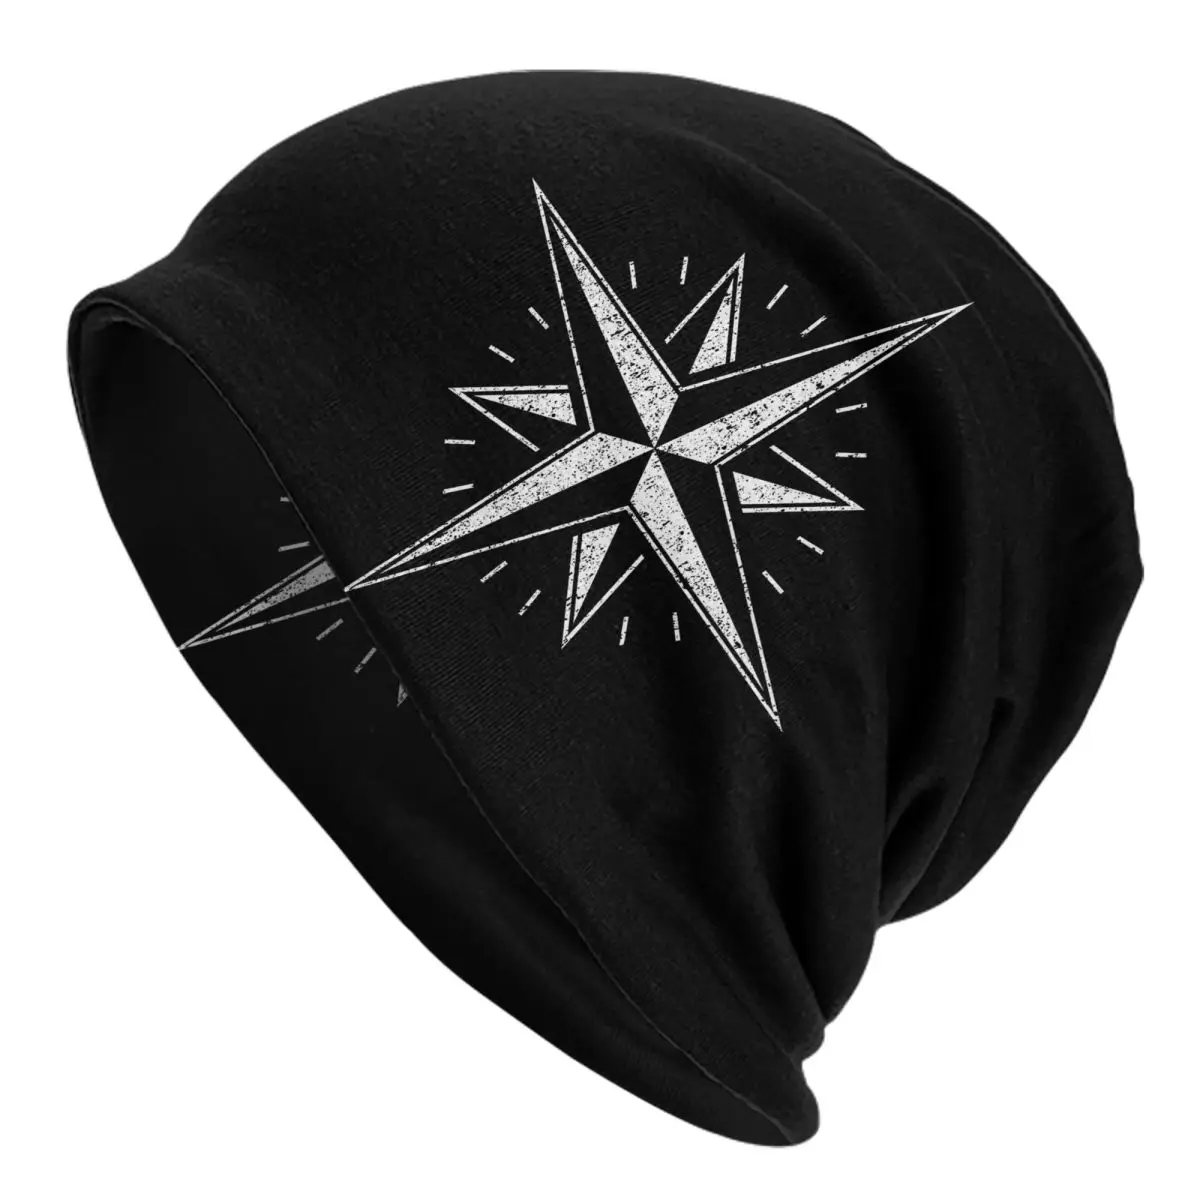 Distressed Compass Nautical Star Adult Men's Women's Knit Hat Keep warm winter knitted hat